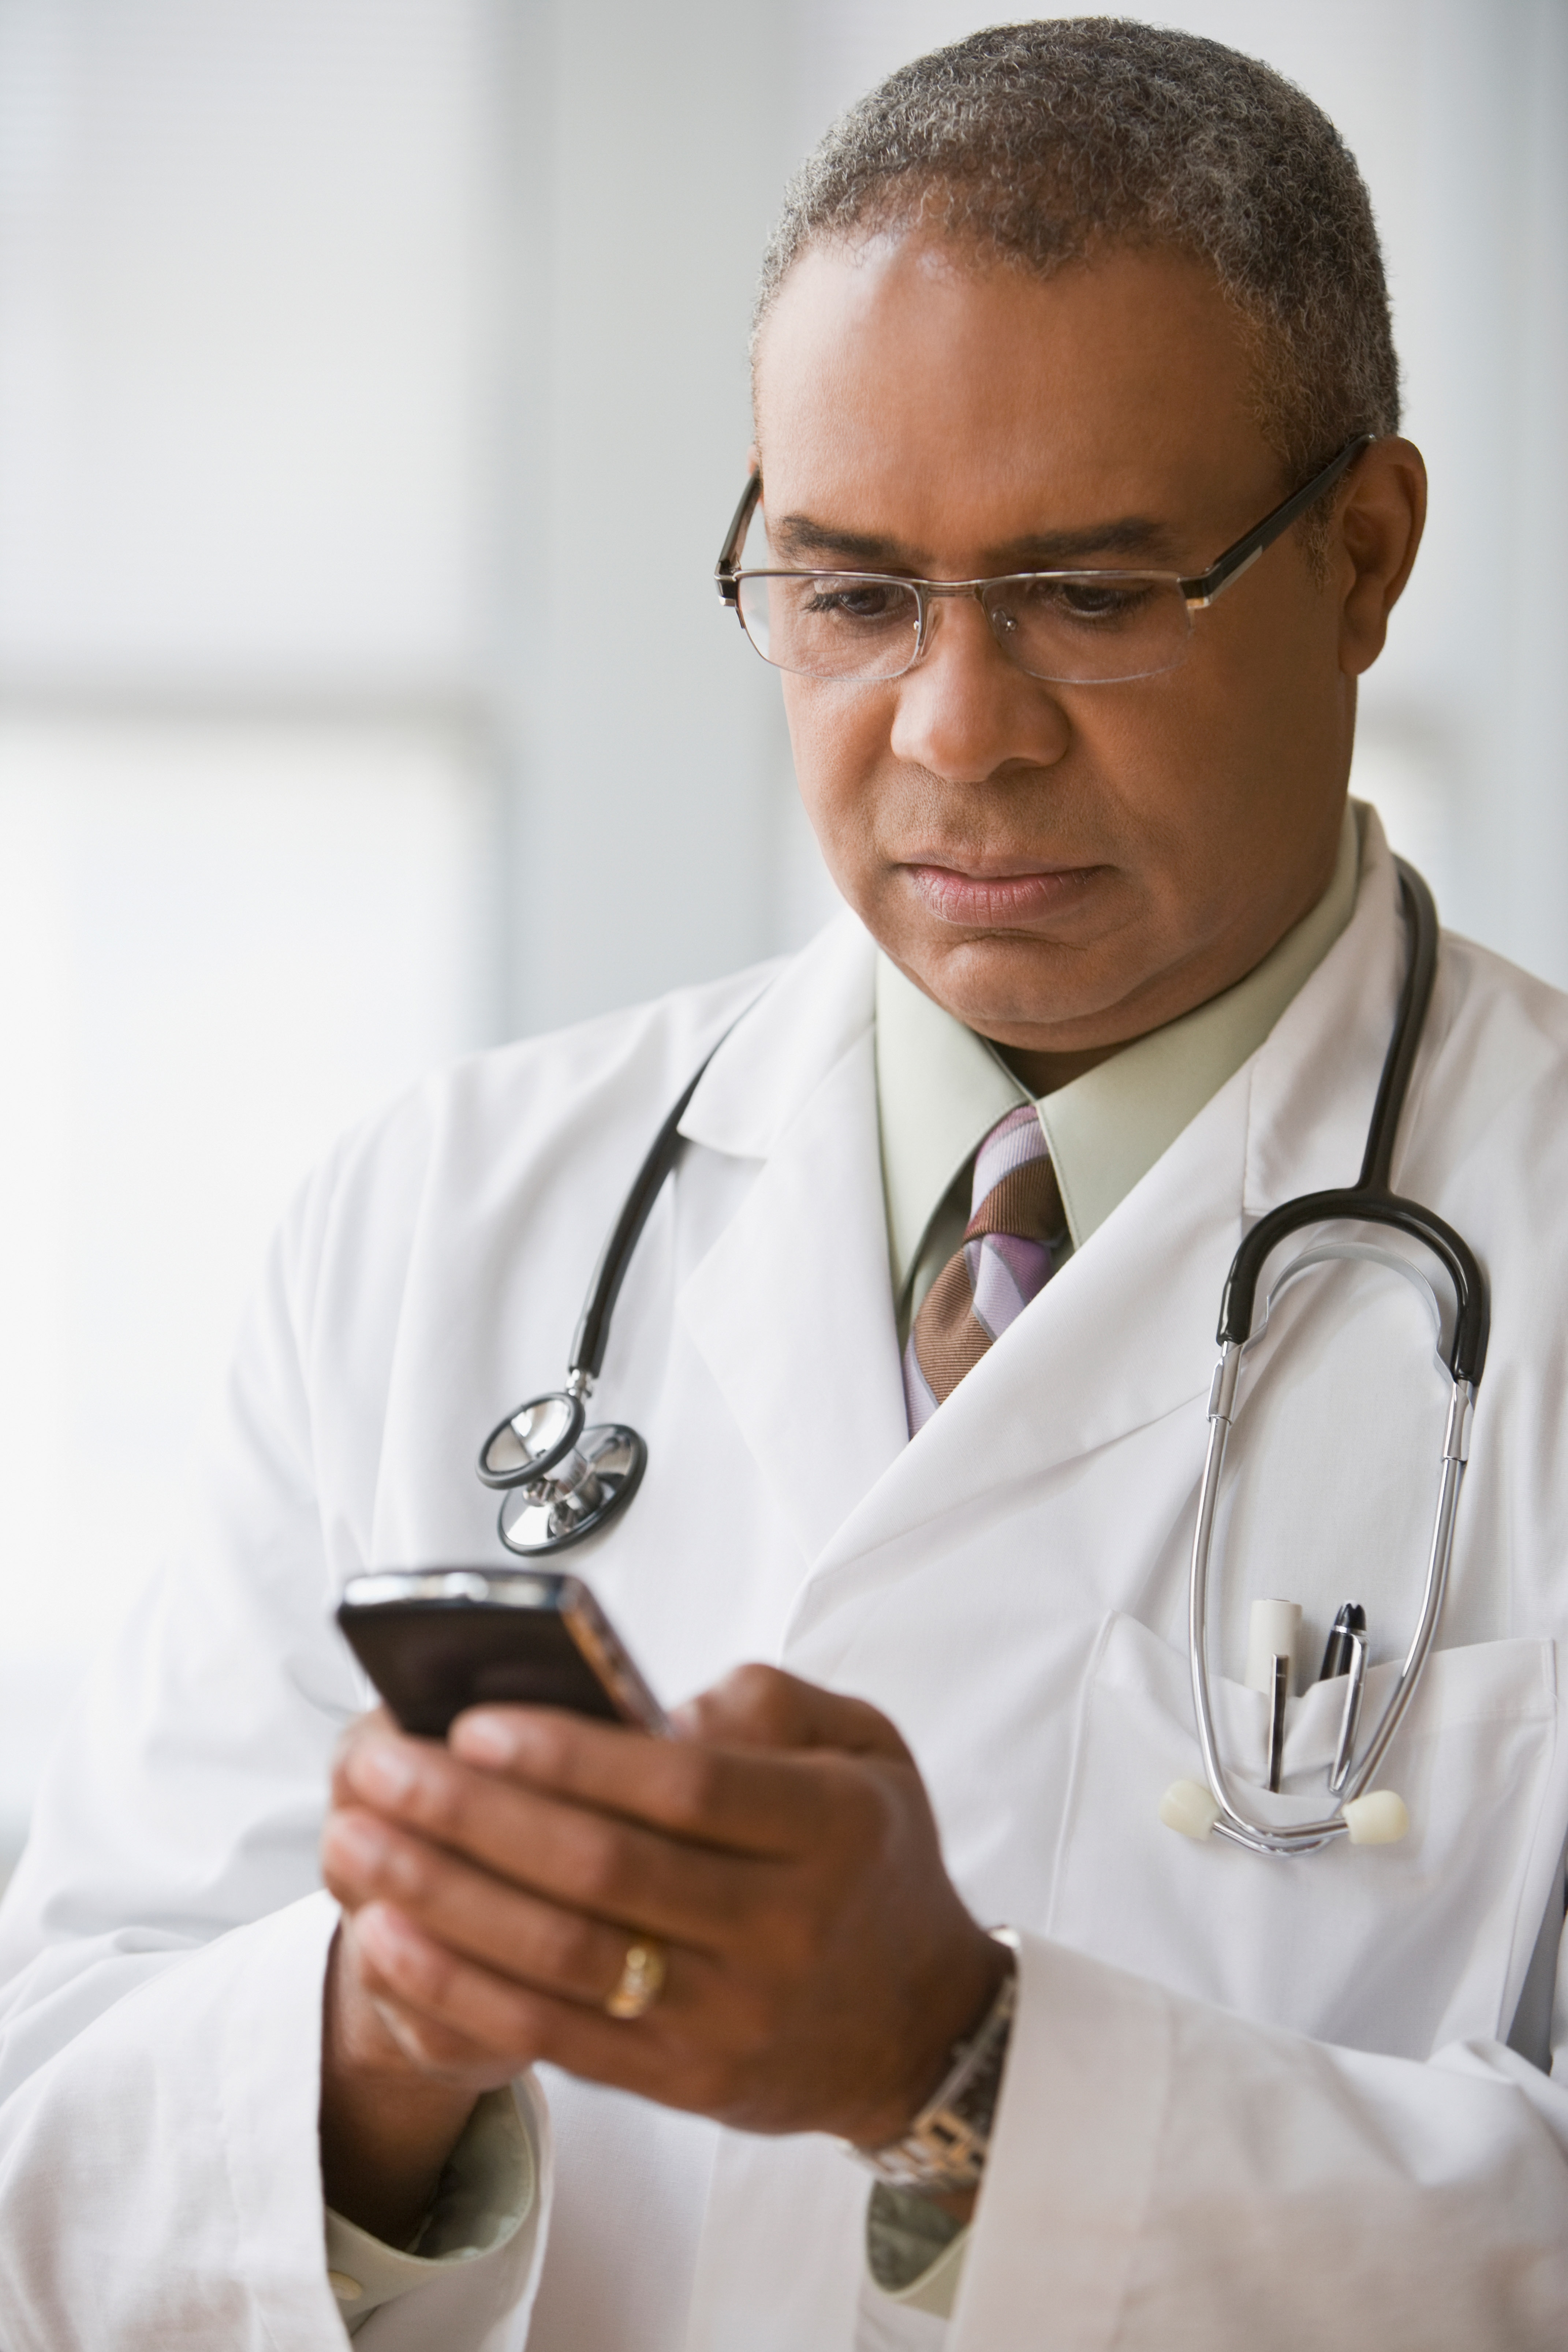 A doctor manages expenses on his phone